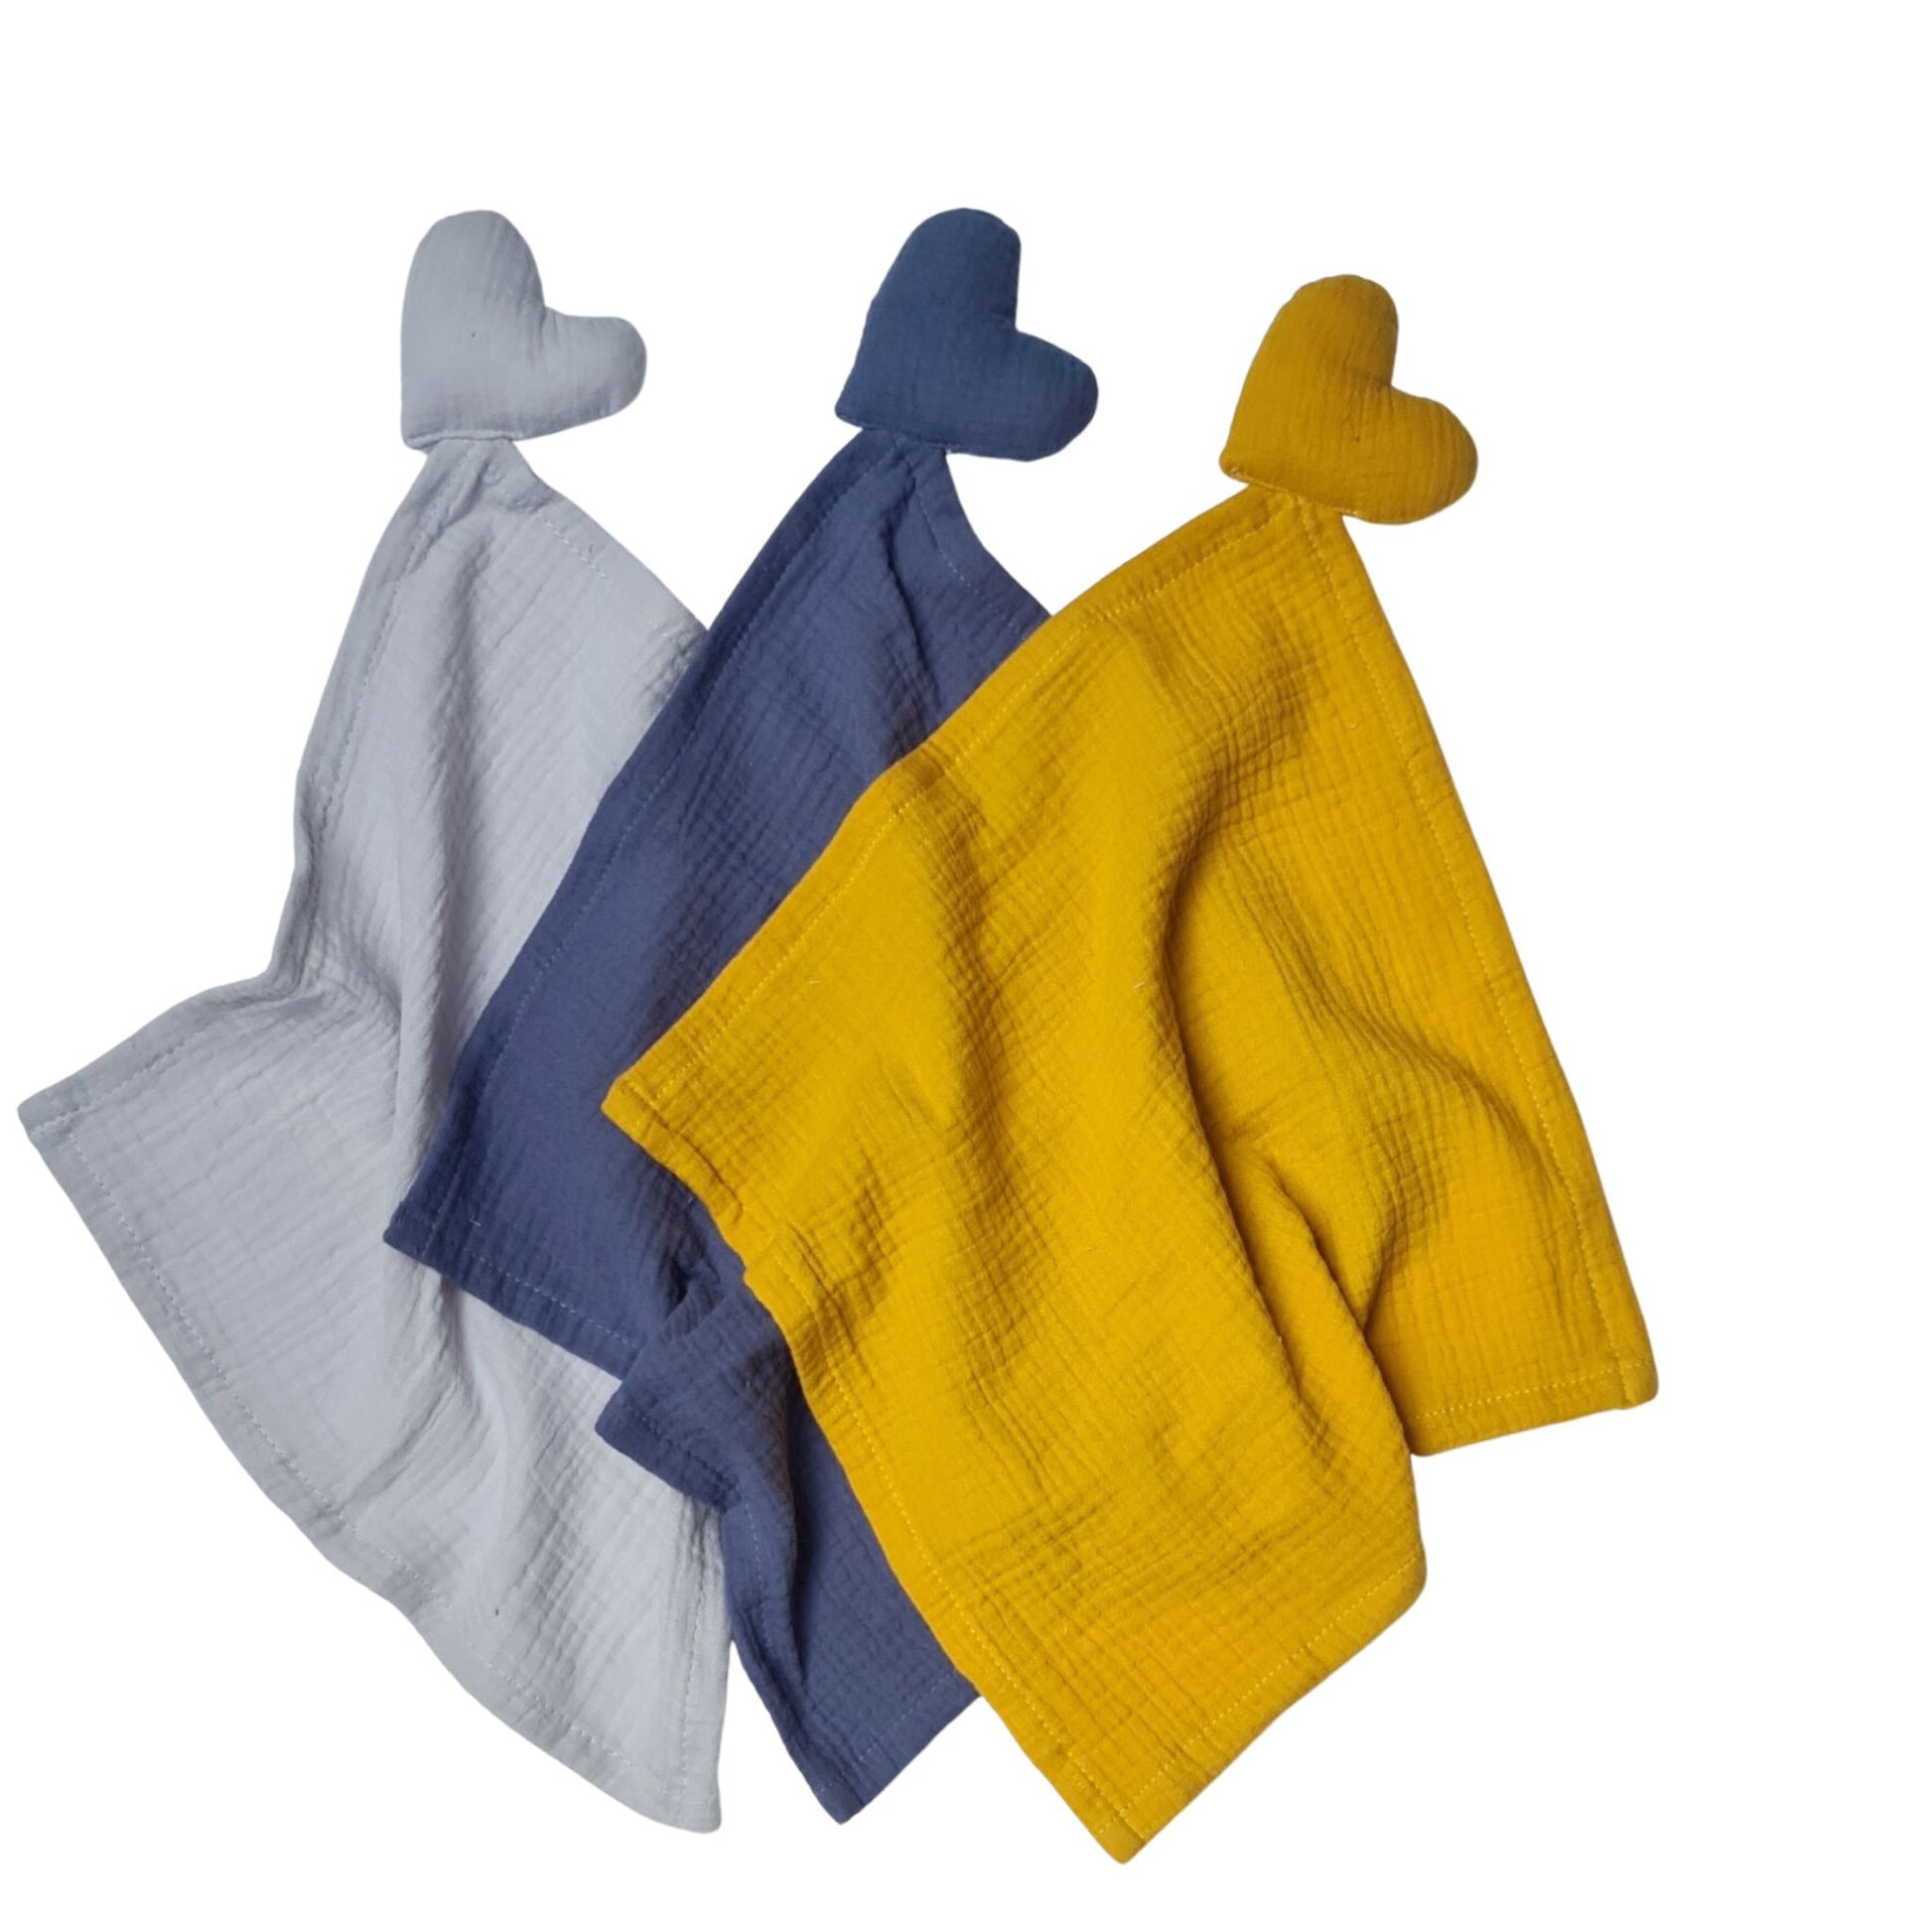 security blankets for children heart blanket 100% cotton blue grey and mustard colours